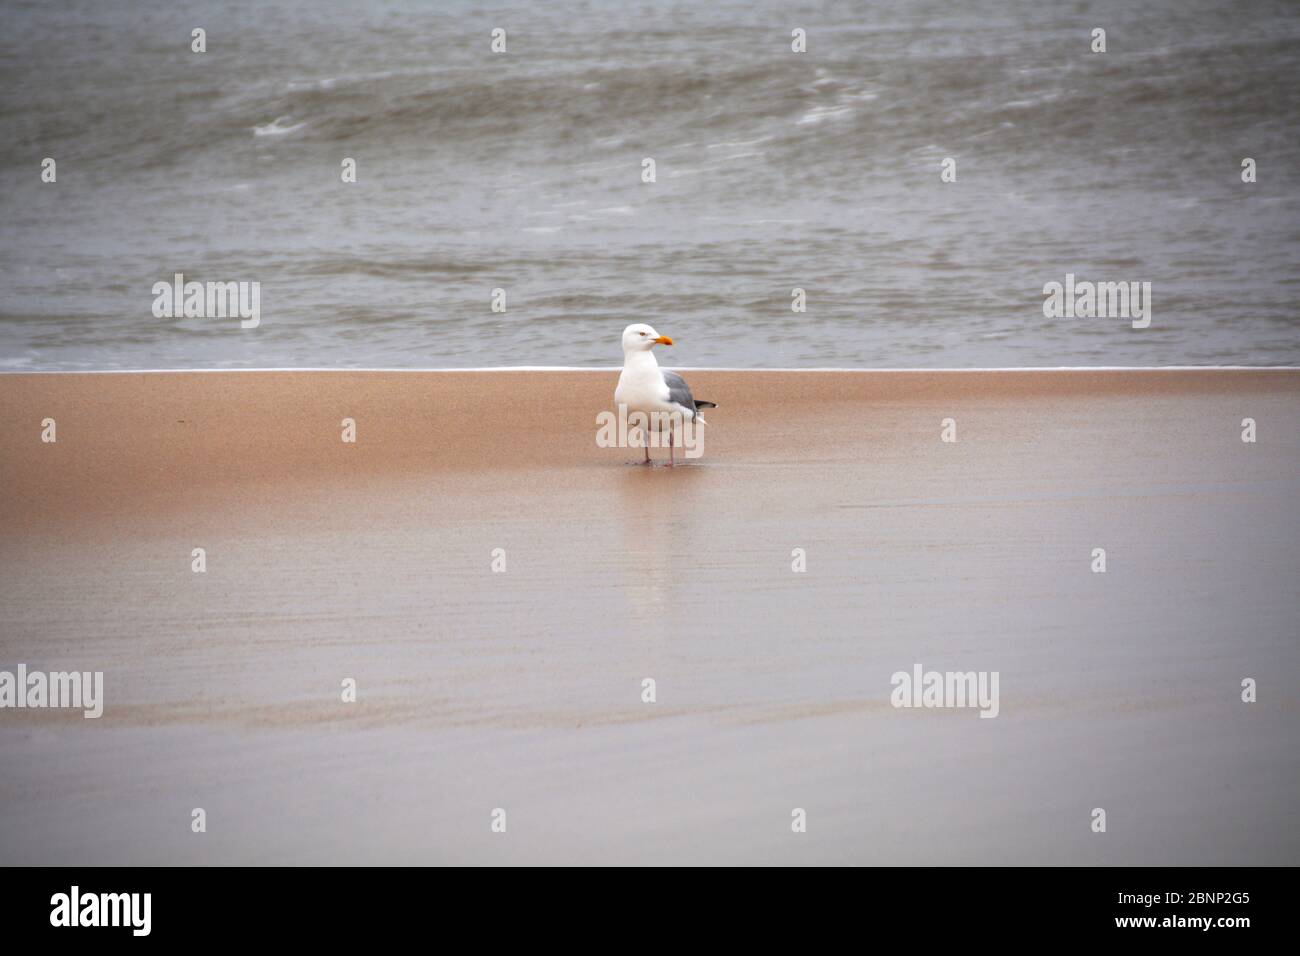 Seagull Perching On Sand, Sylt, Germany Stock Photo